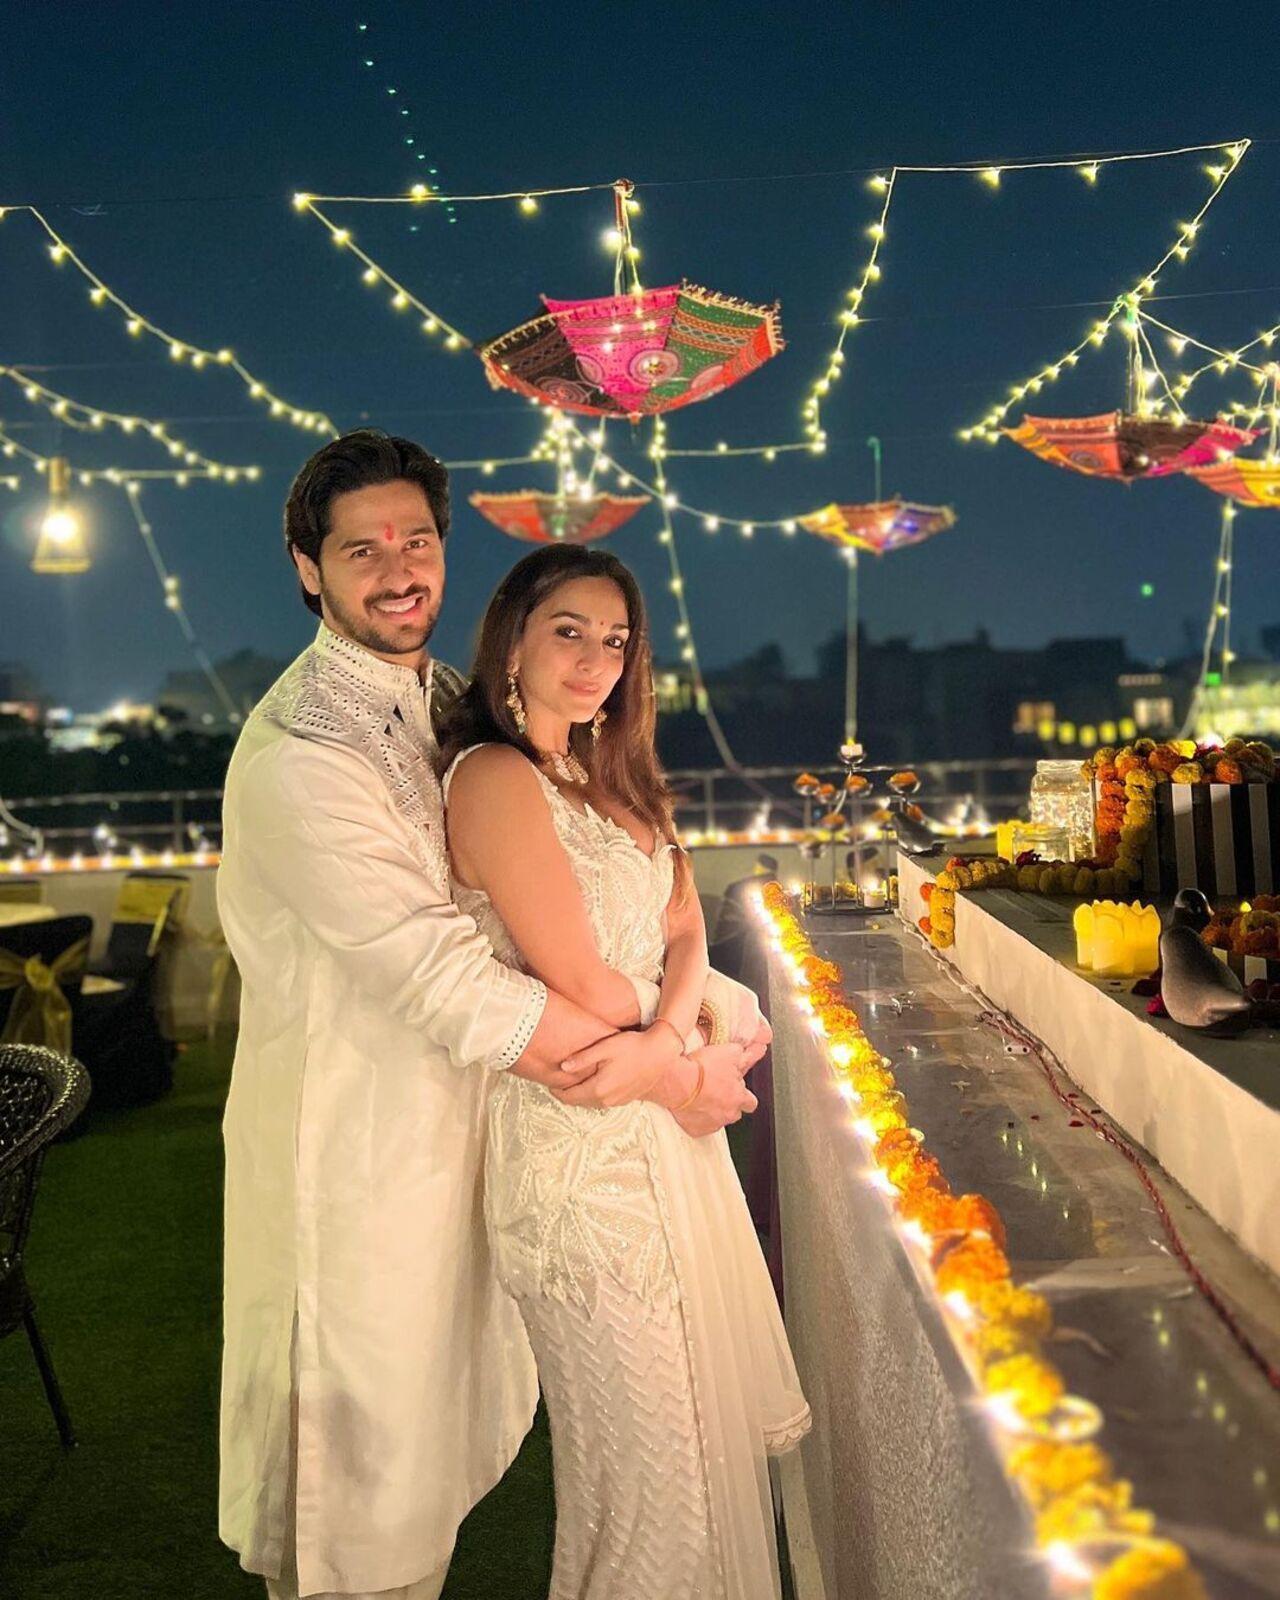 Sidharth Malhotra and Kiara Advani celebrated their first Diwali after marriage at his residence in Delhi. The couple twinned in ivory and posed for pictures